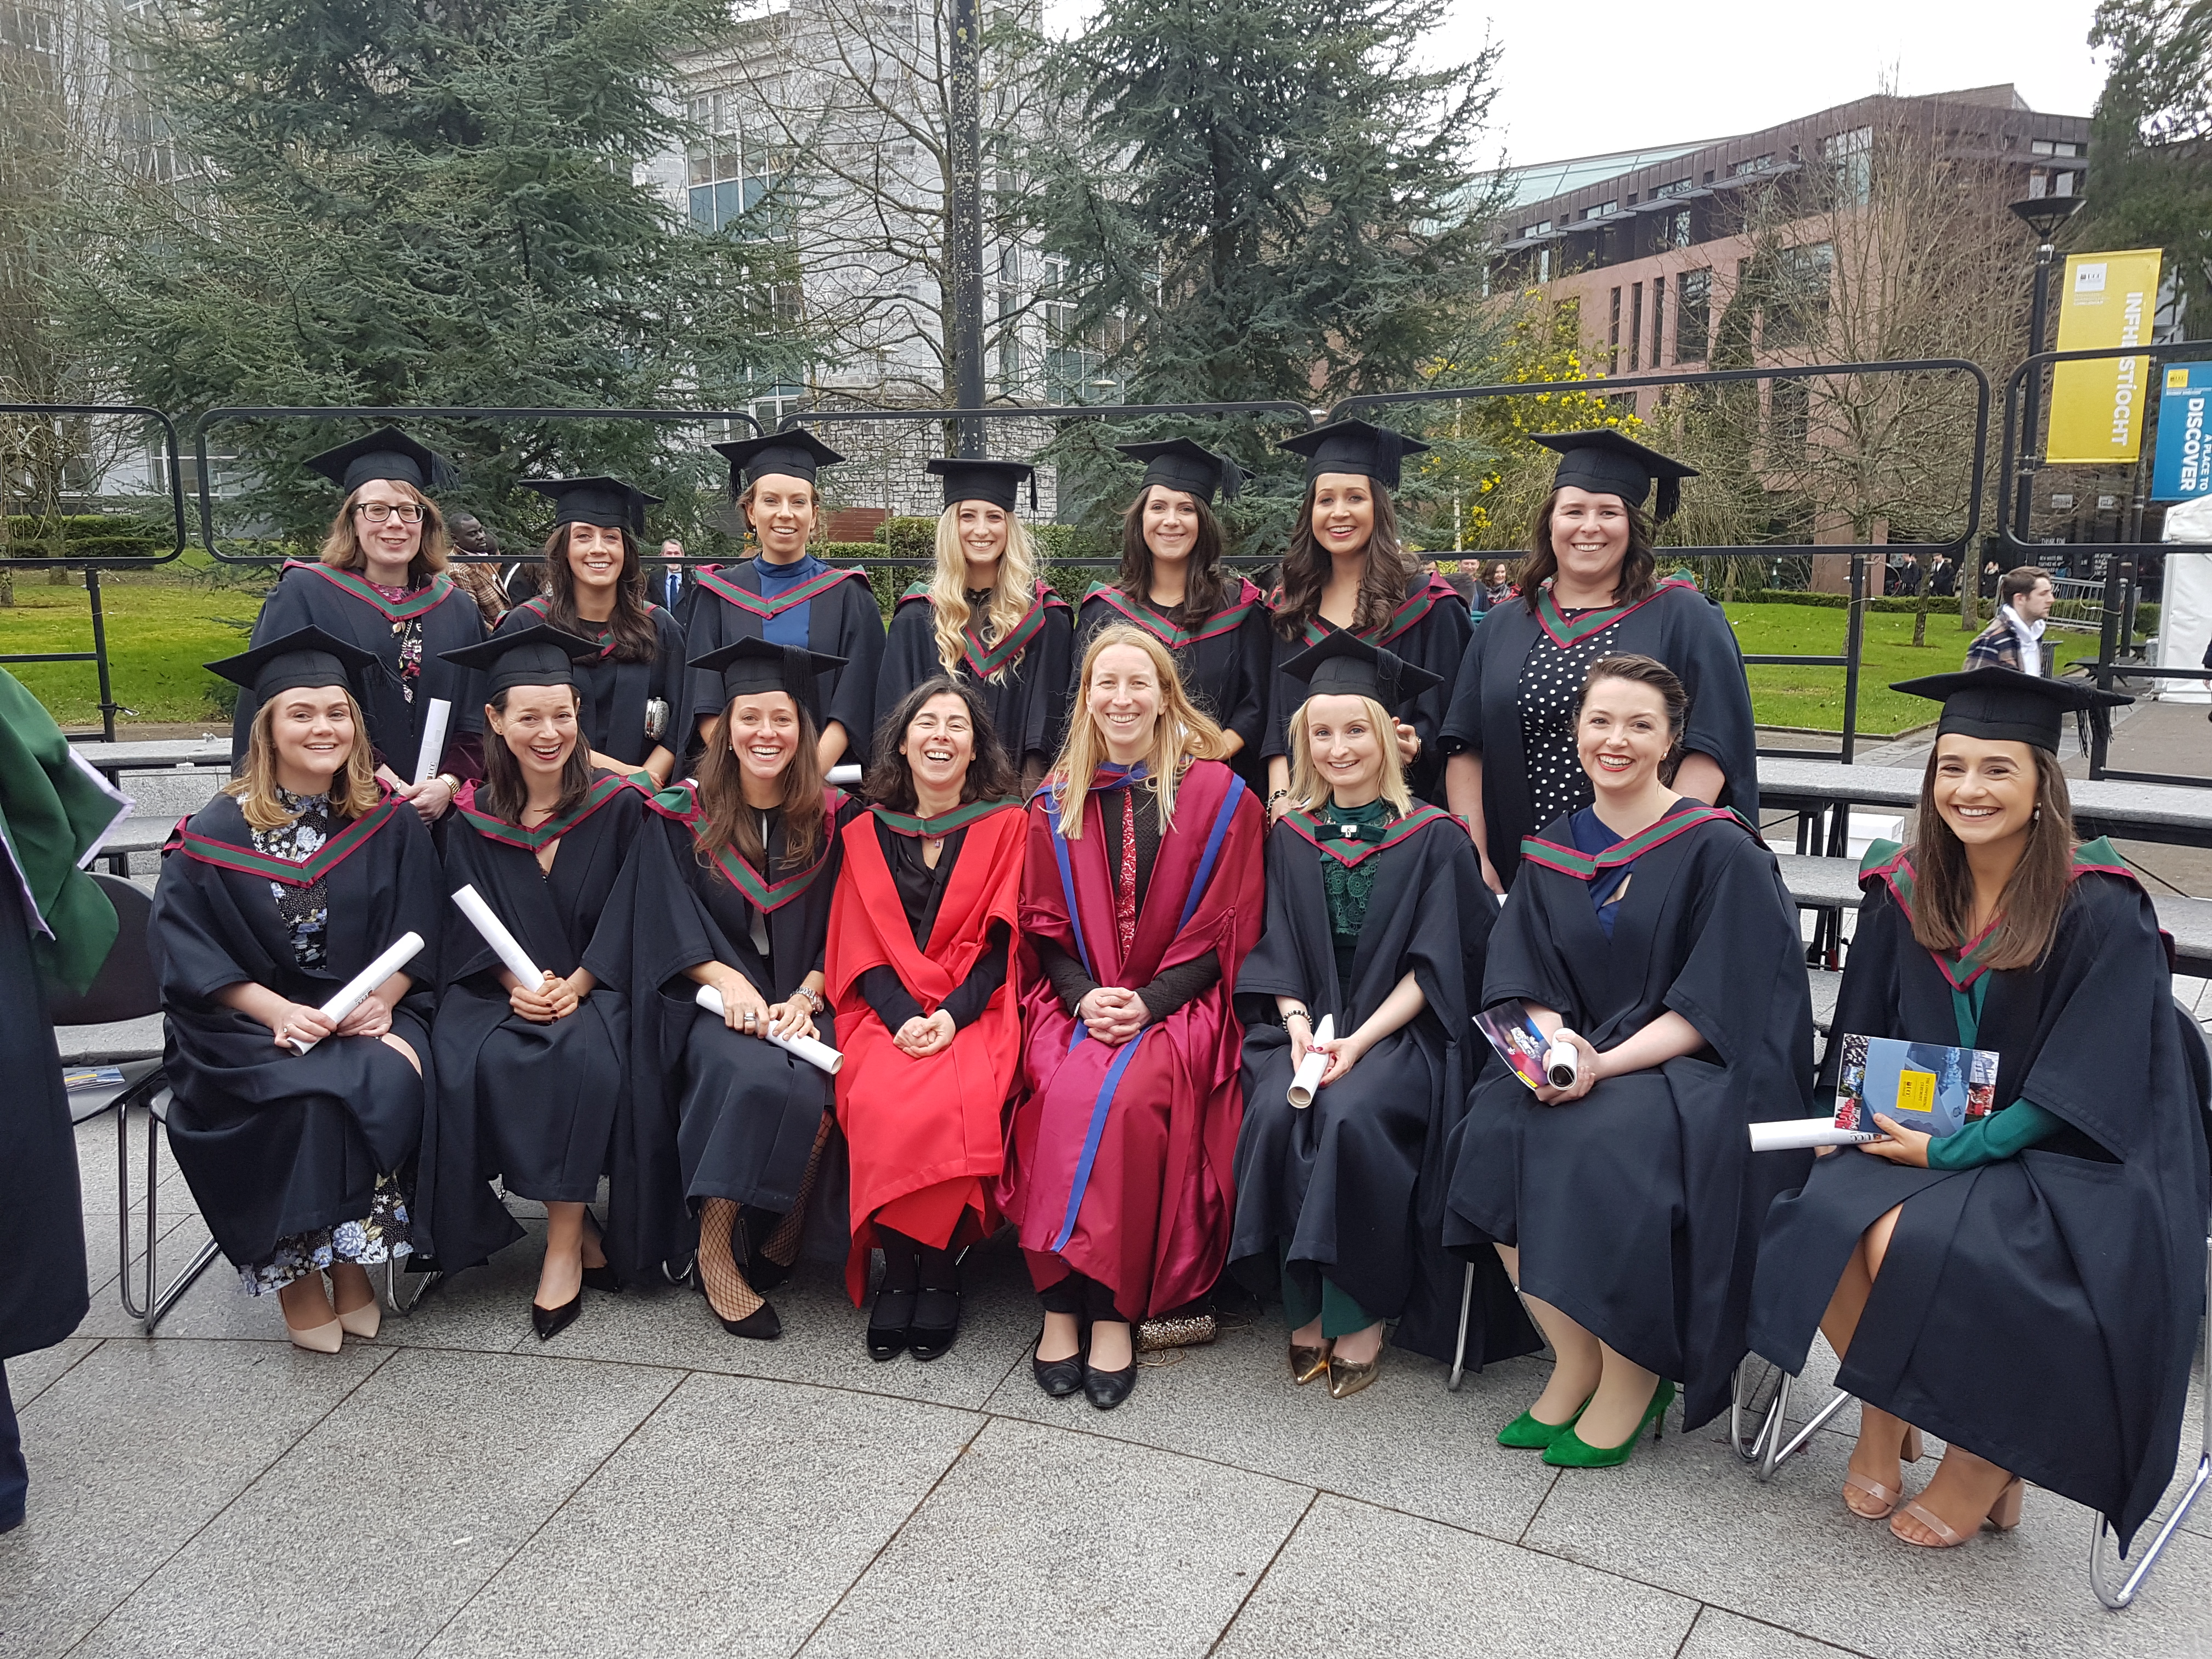 Congratulations to the MSc in Clinical Pharmacy Graduates, Class 2017-2019